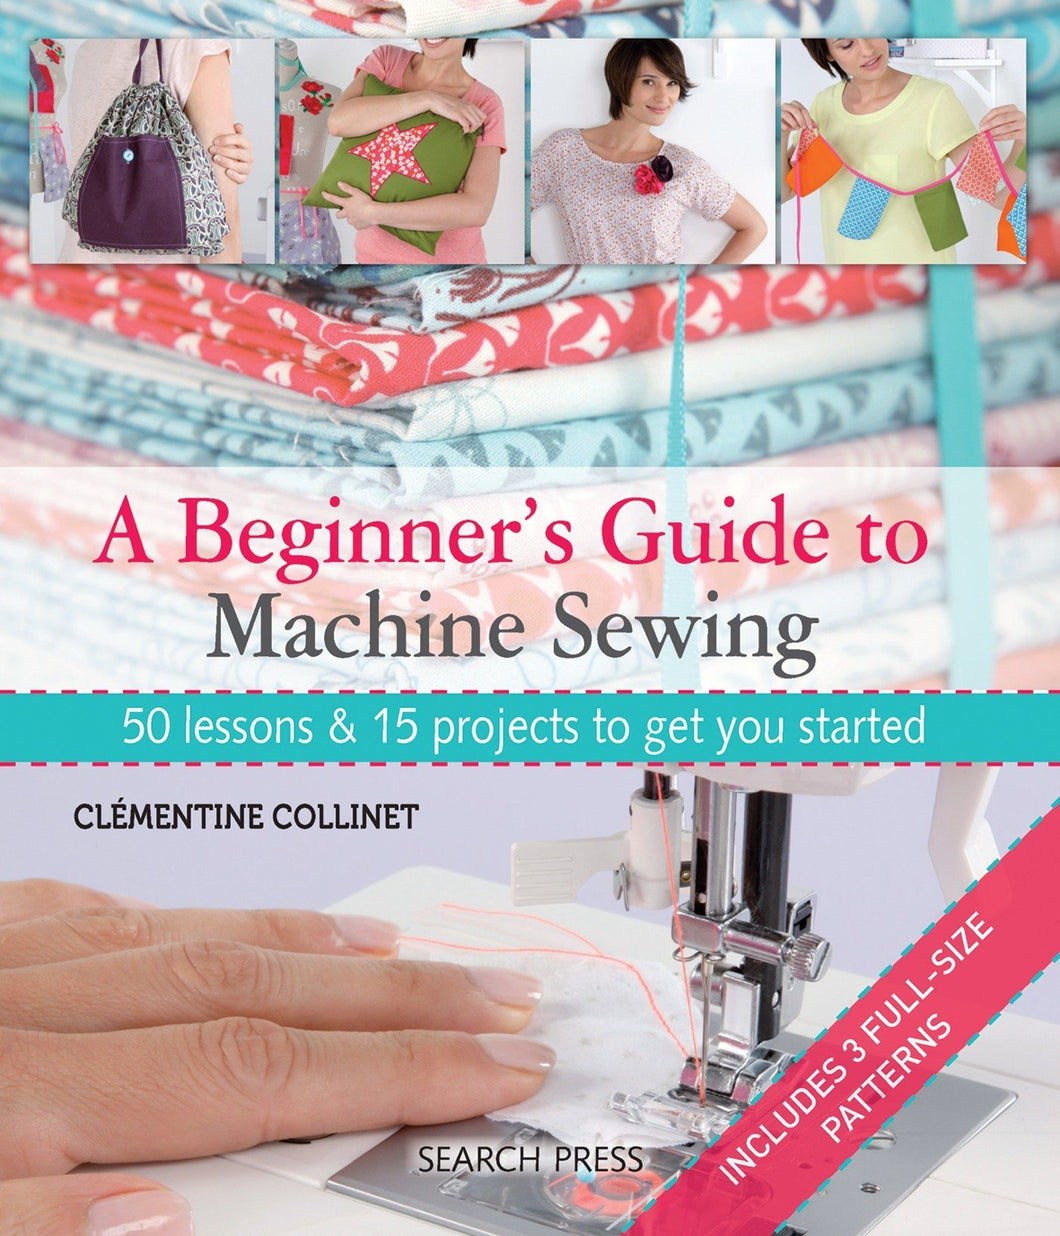 A Beginners Guide to Machine Sewing - 50 lessons & 15 Projects